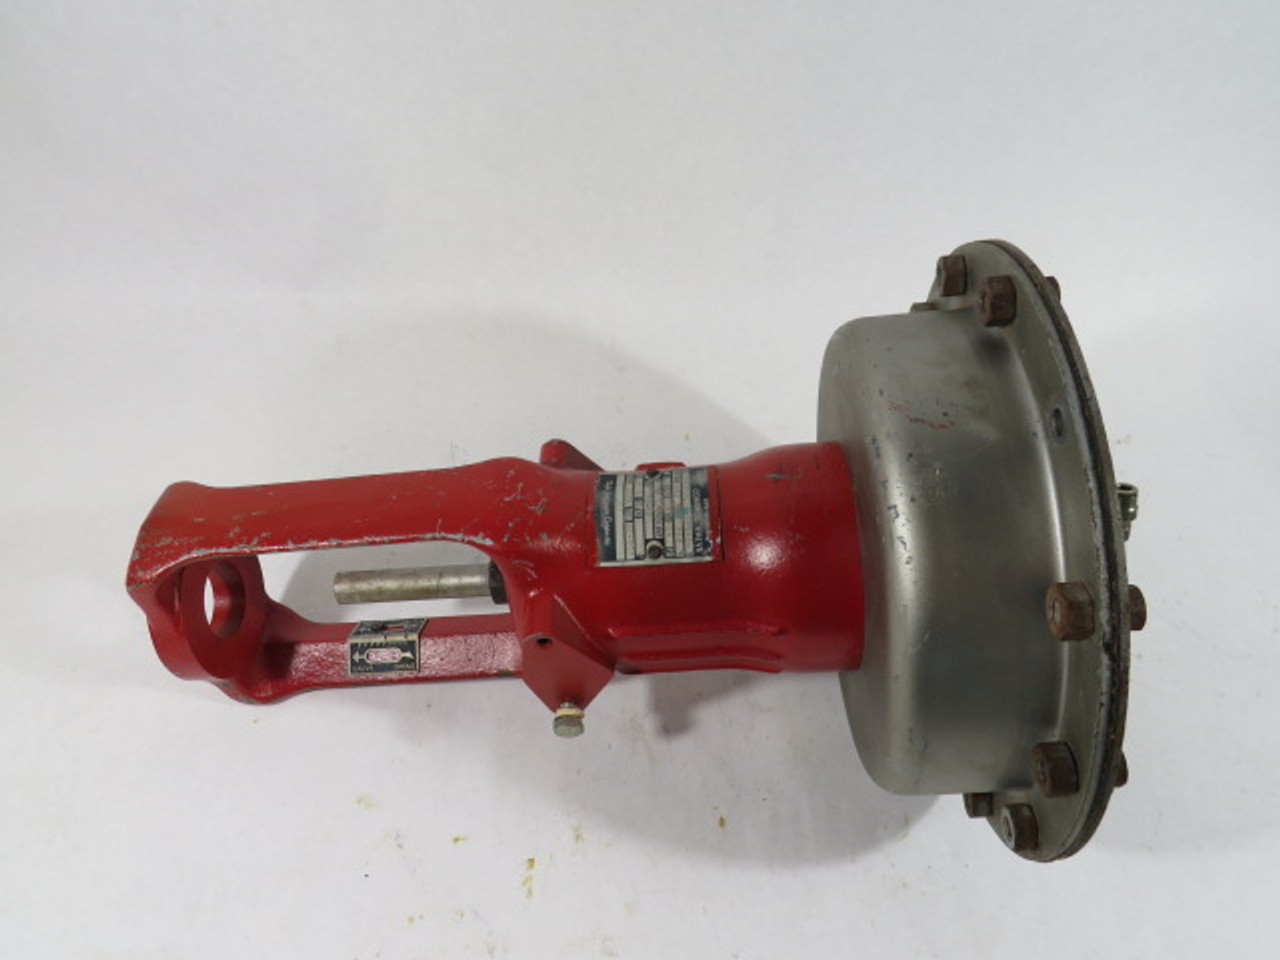 Taylor 1-1/4" Lin-E-Aire High Flow Iron Control Valve 1-1/4" 7.5-15PSI USED